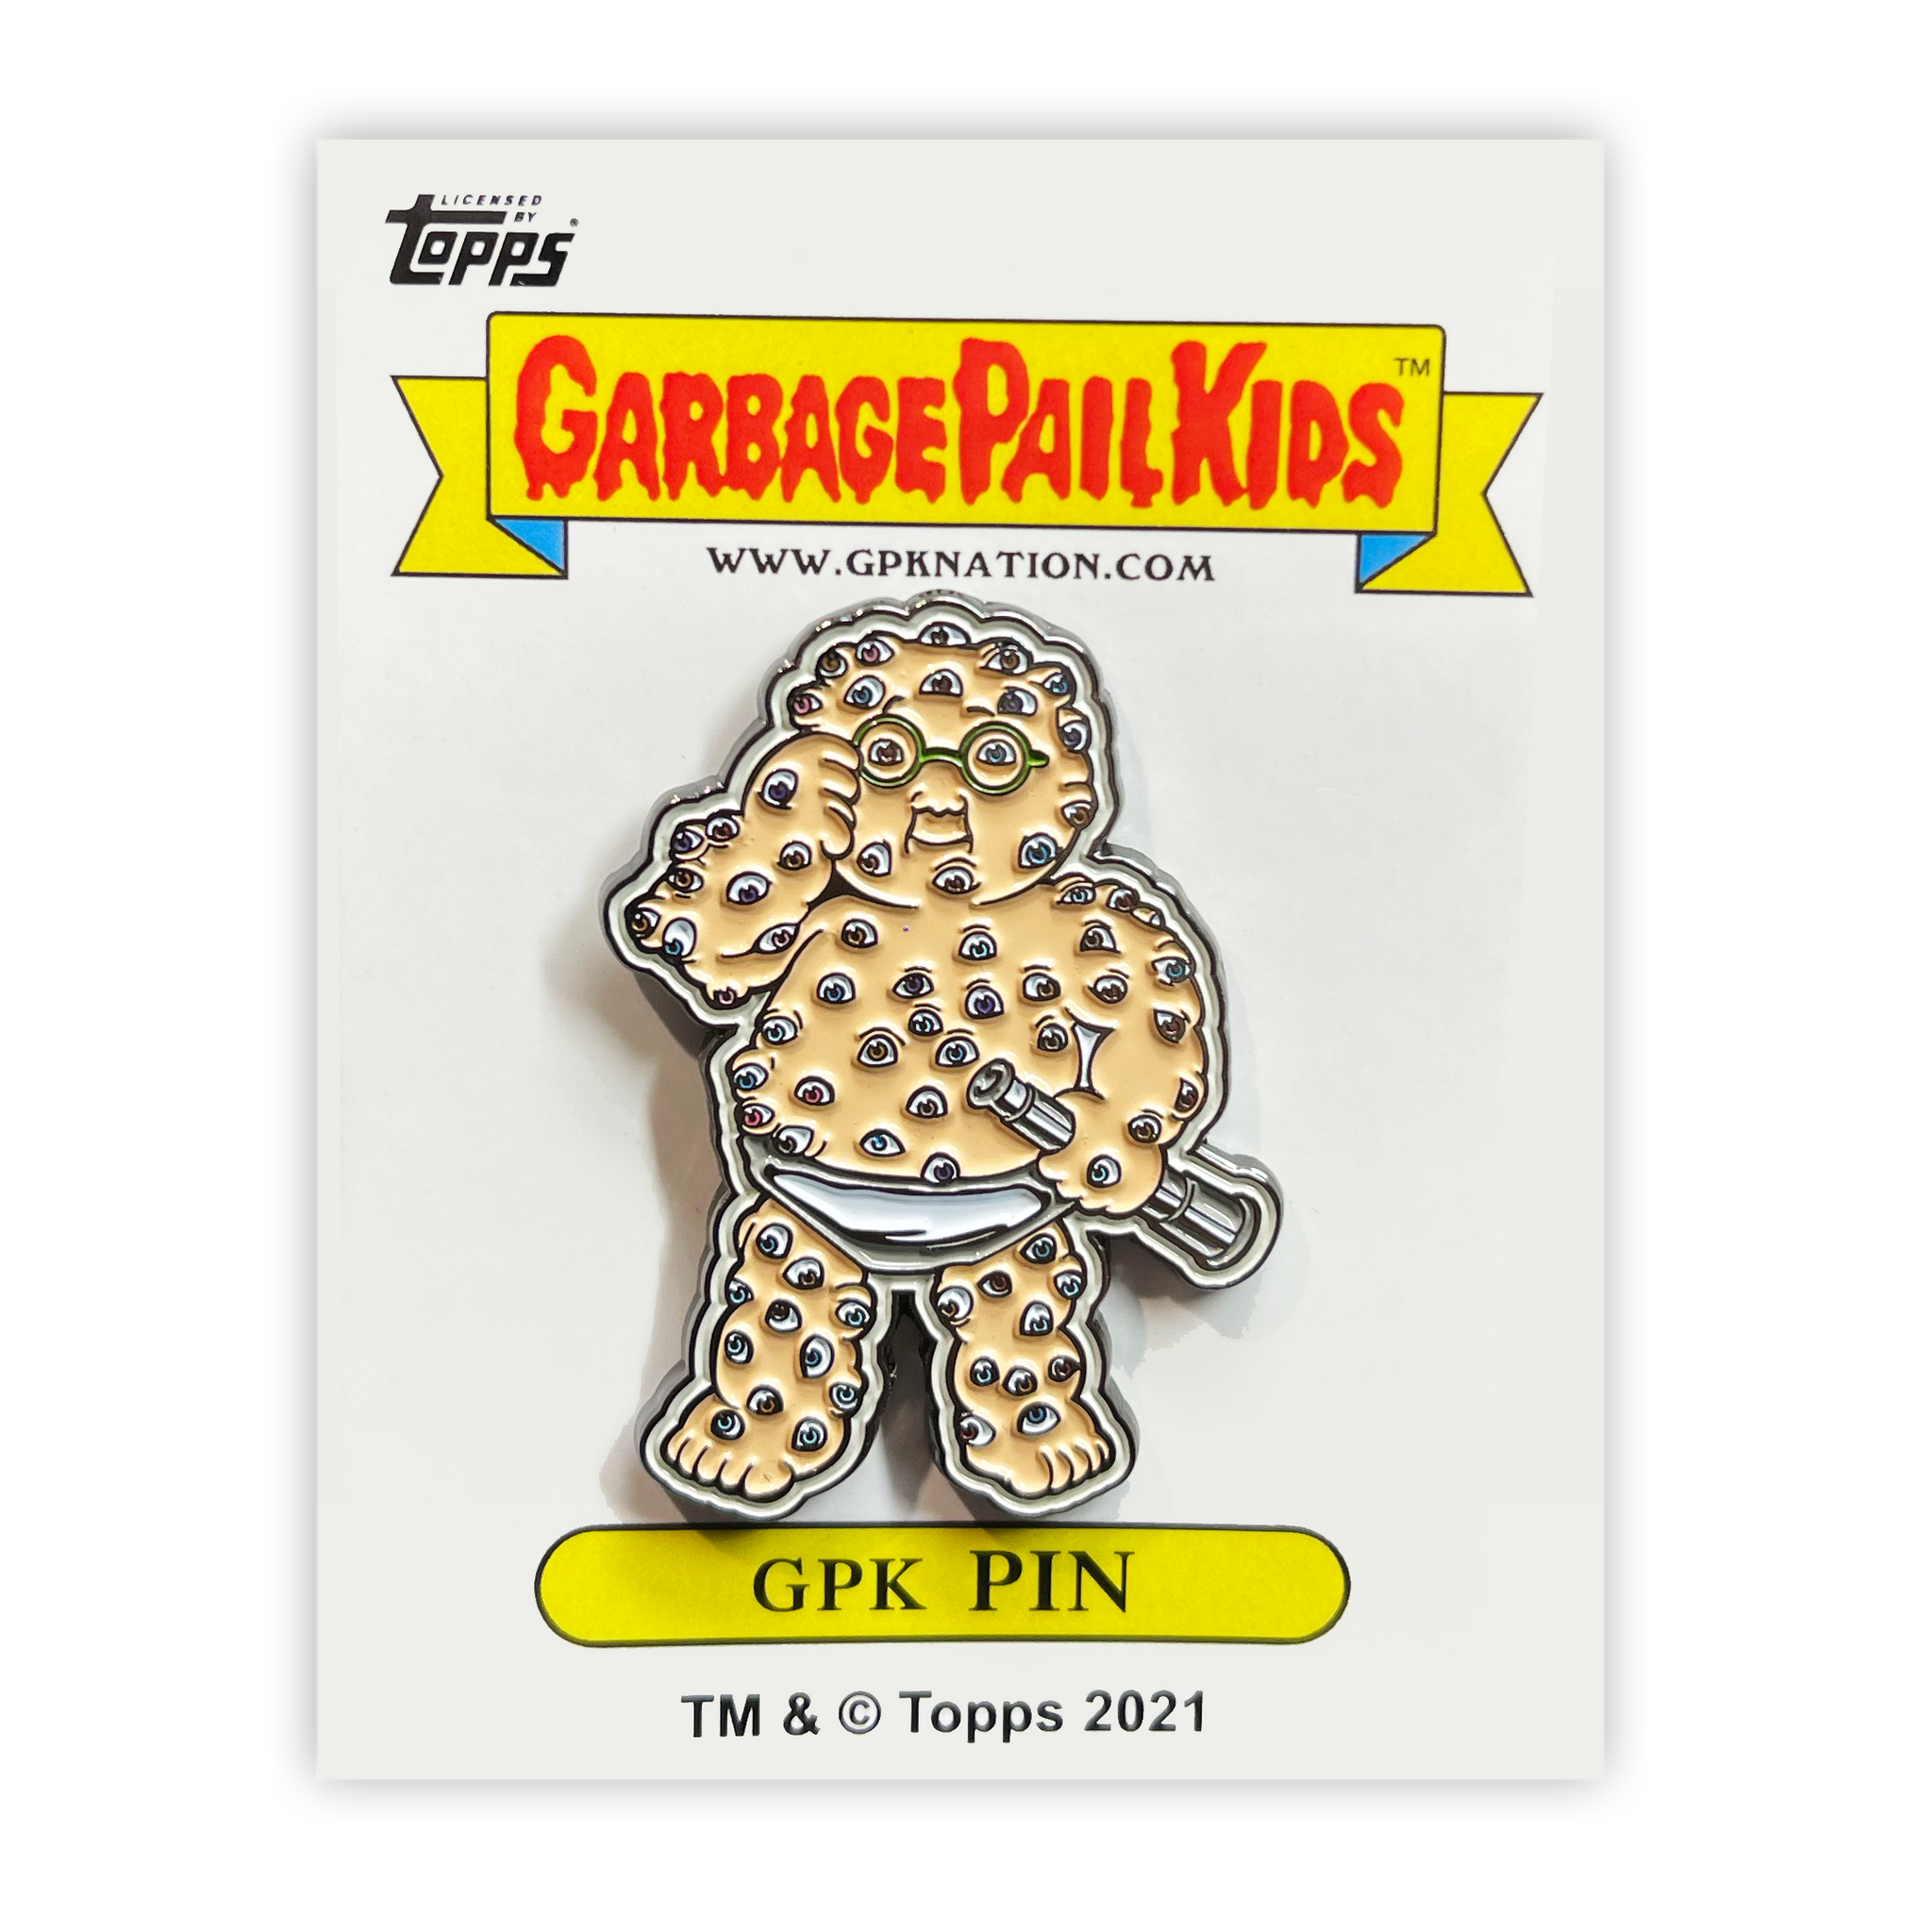 GPK-PP-001 Topps Officially Licensed GPK Peepin' Tom / Starin' Darren Garbage Pail Kids Limited Edition pins